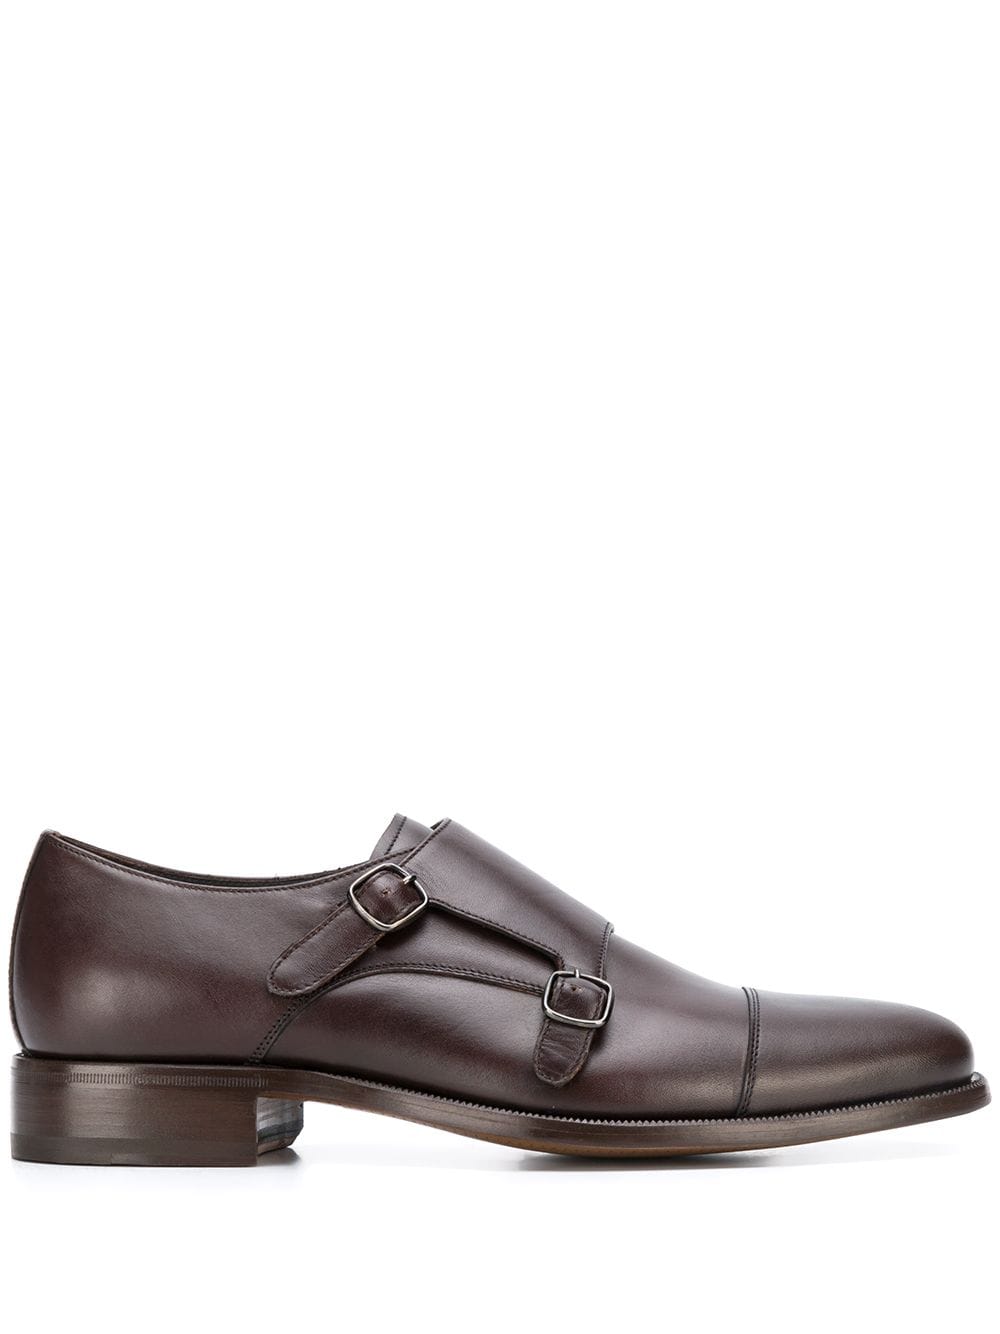 Scarosso classic monk shoes